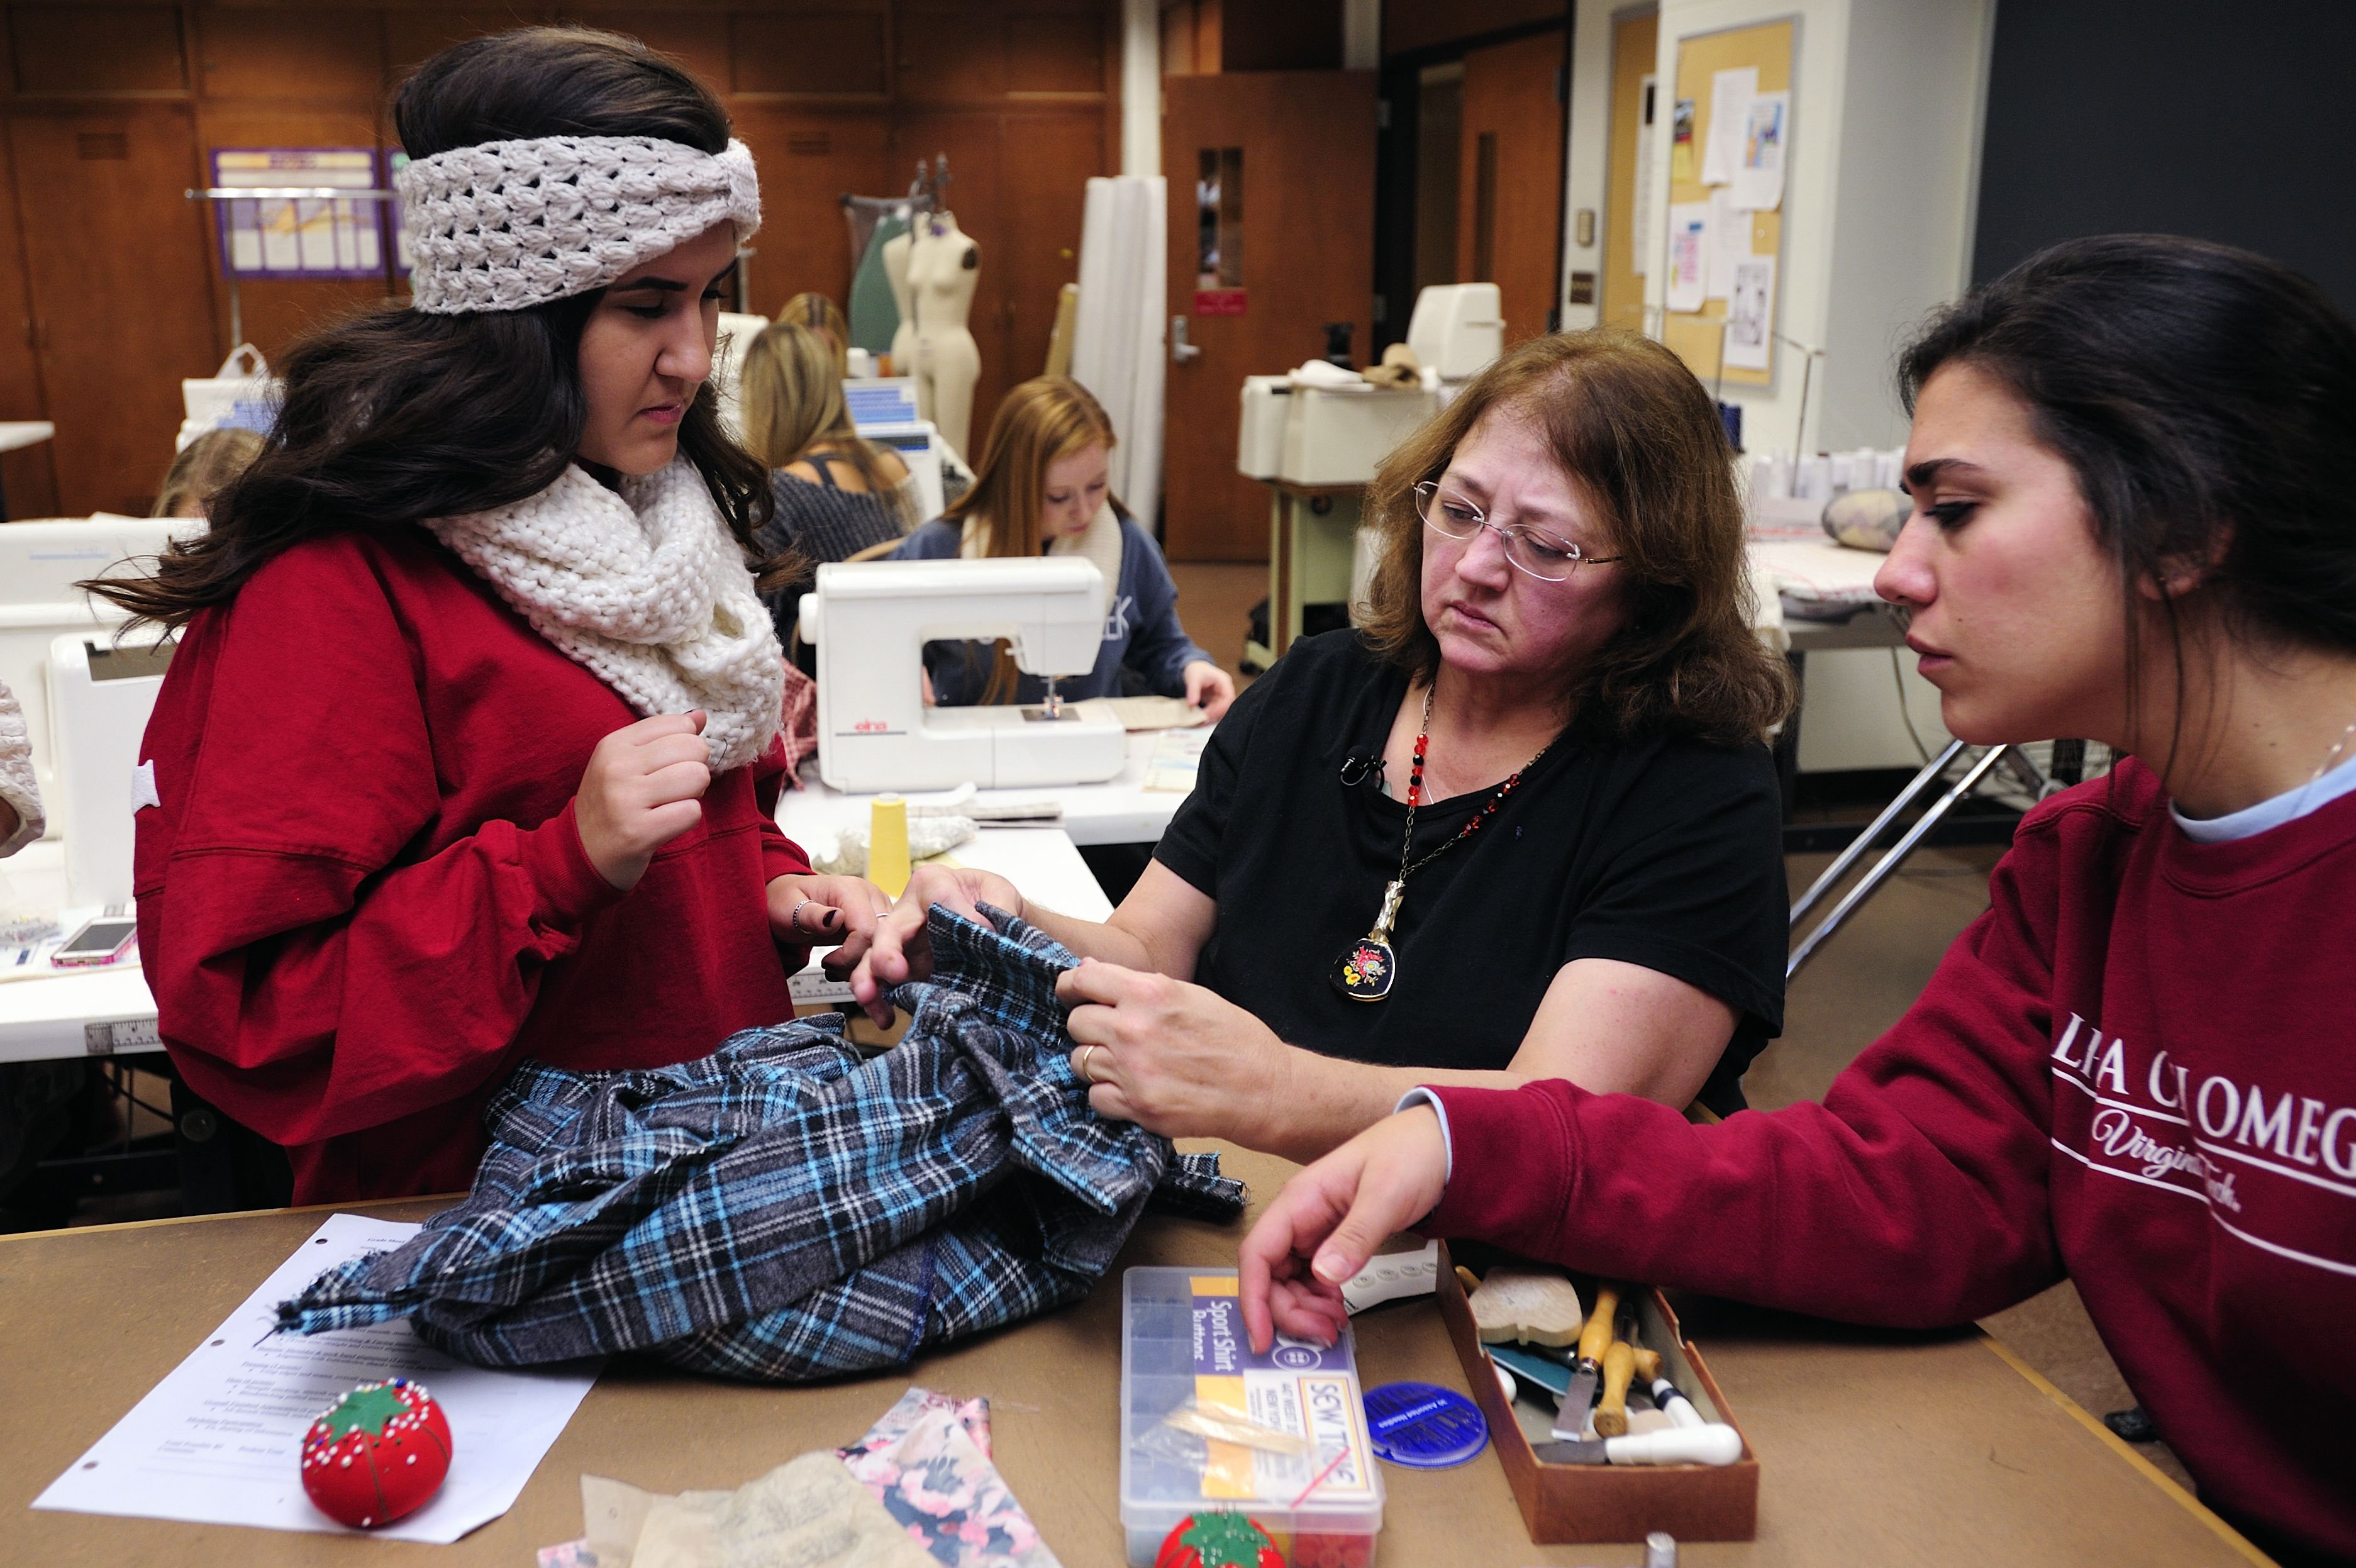 Peggy Quesenberry works with students in an apparel production class.